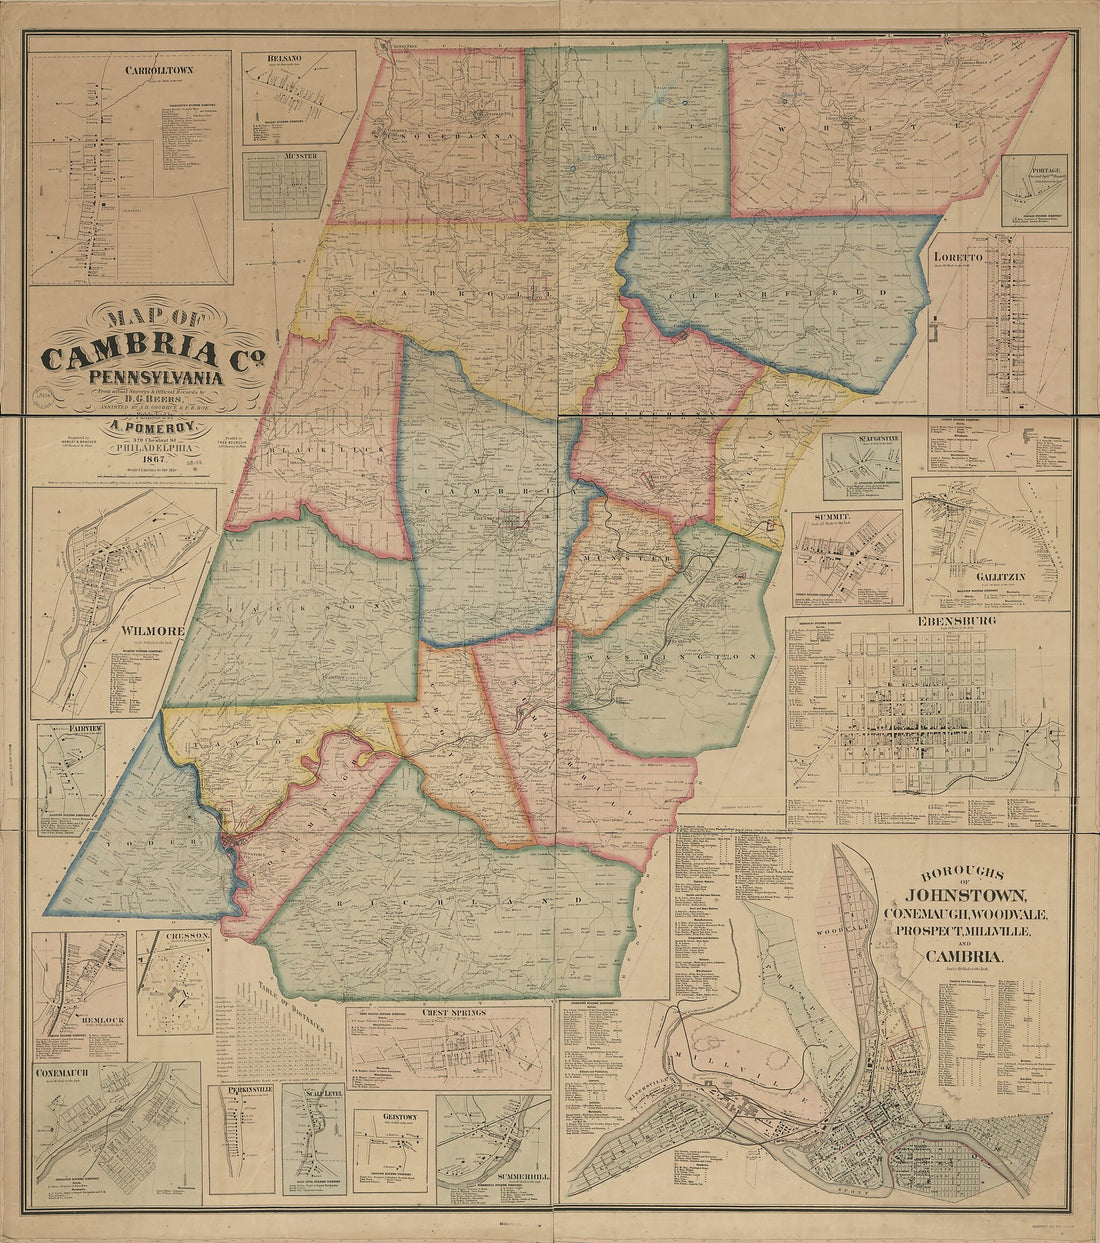 This old map of Map of Cambria County, Pennsylvania : from Actual Surveys &amp; Official Records from 1867 was created by D. G. (Daniel G.) Beers, F. (Frederick) Bourquin, J. H. Goodhue, A. Pomeroy, Frederick B. Roe,  Worley &amp; Bracher in 1867